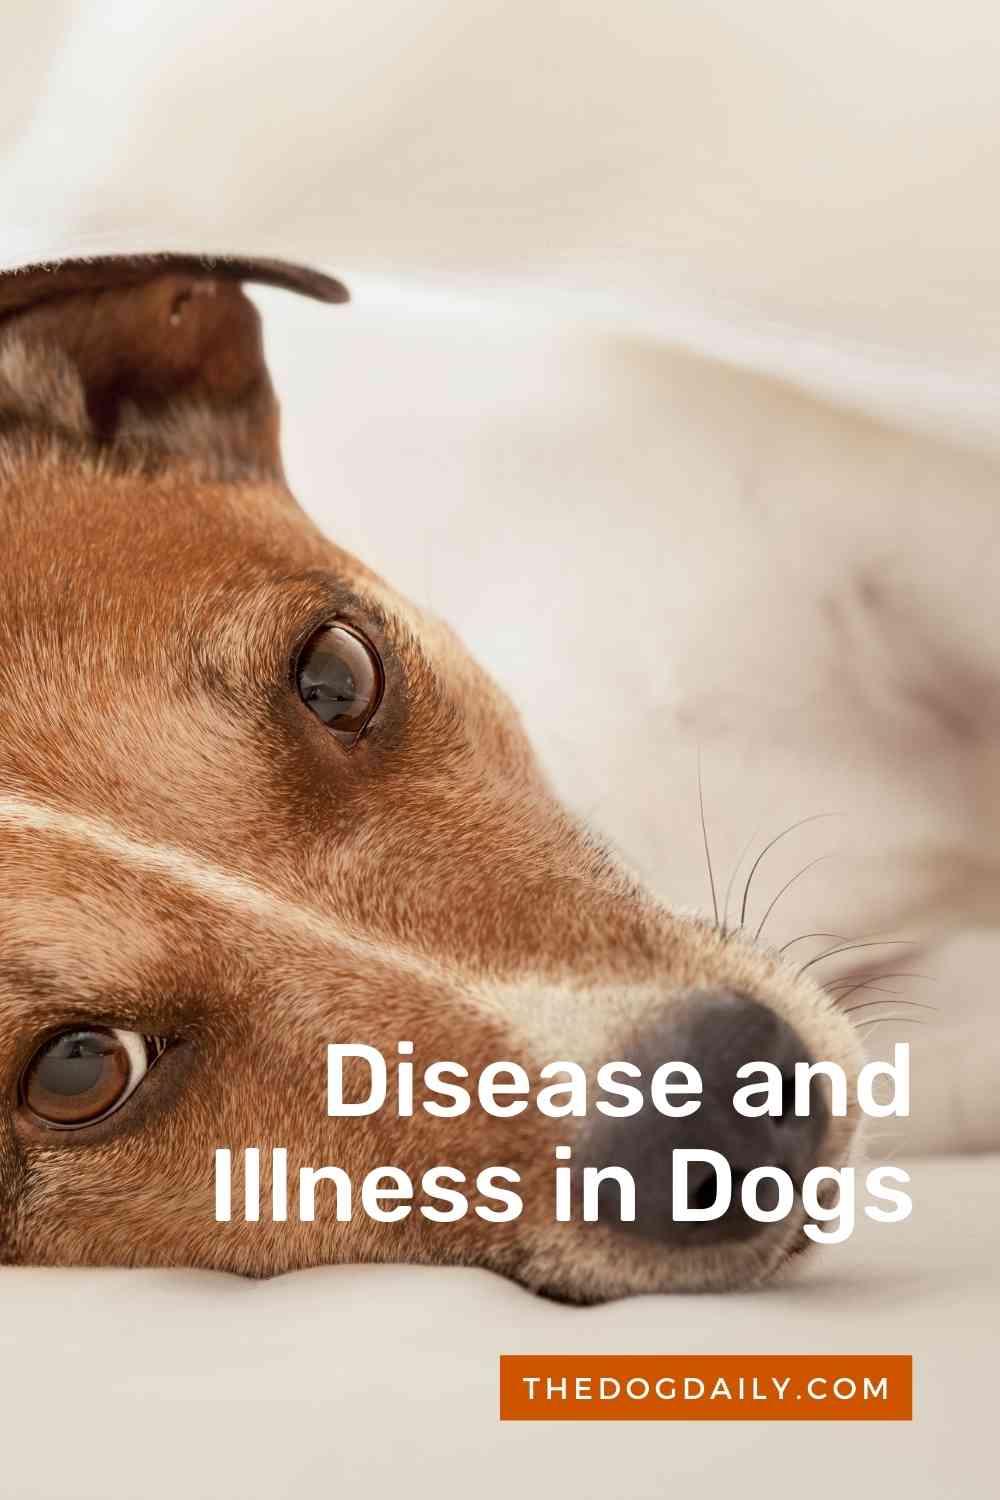 Guide To Disease and Illness in Dogs - The Dog Daily